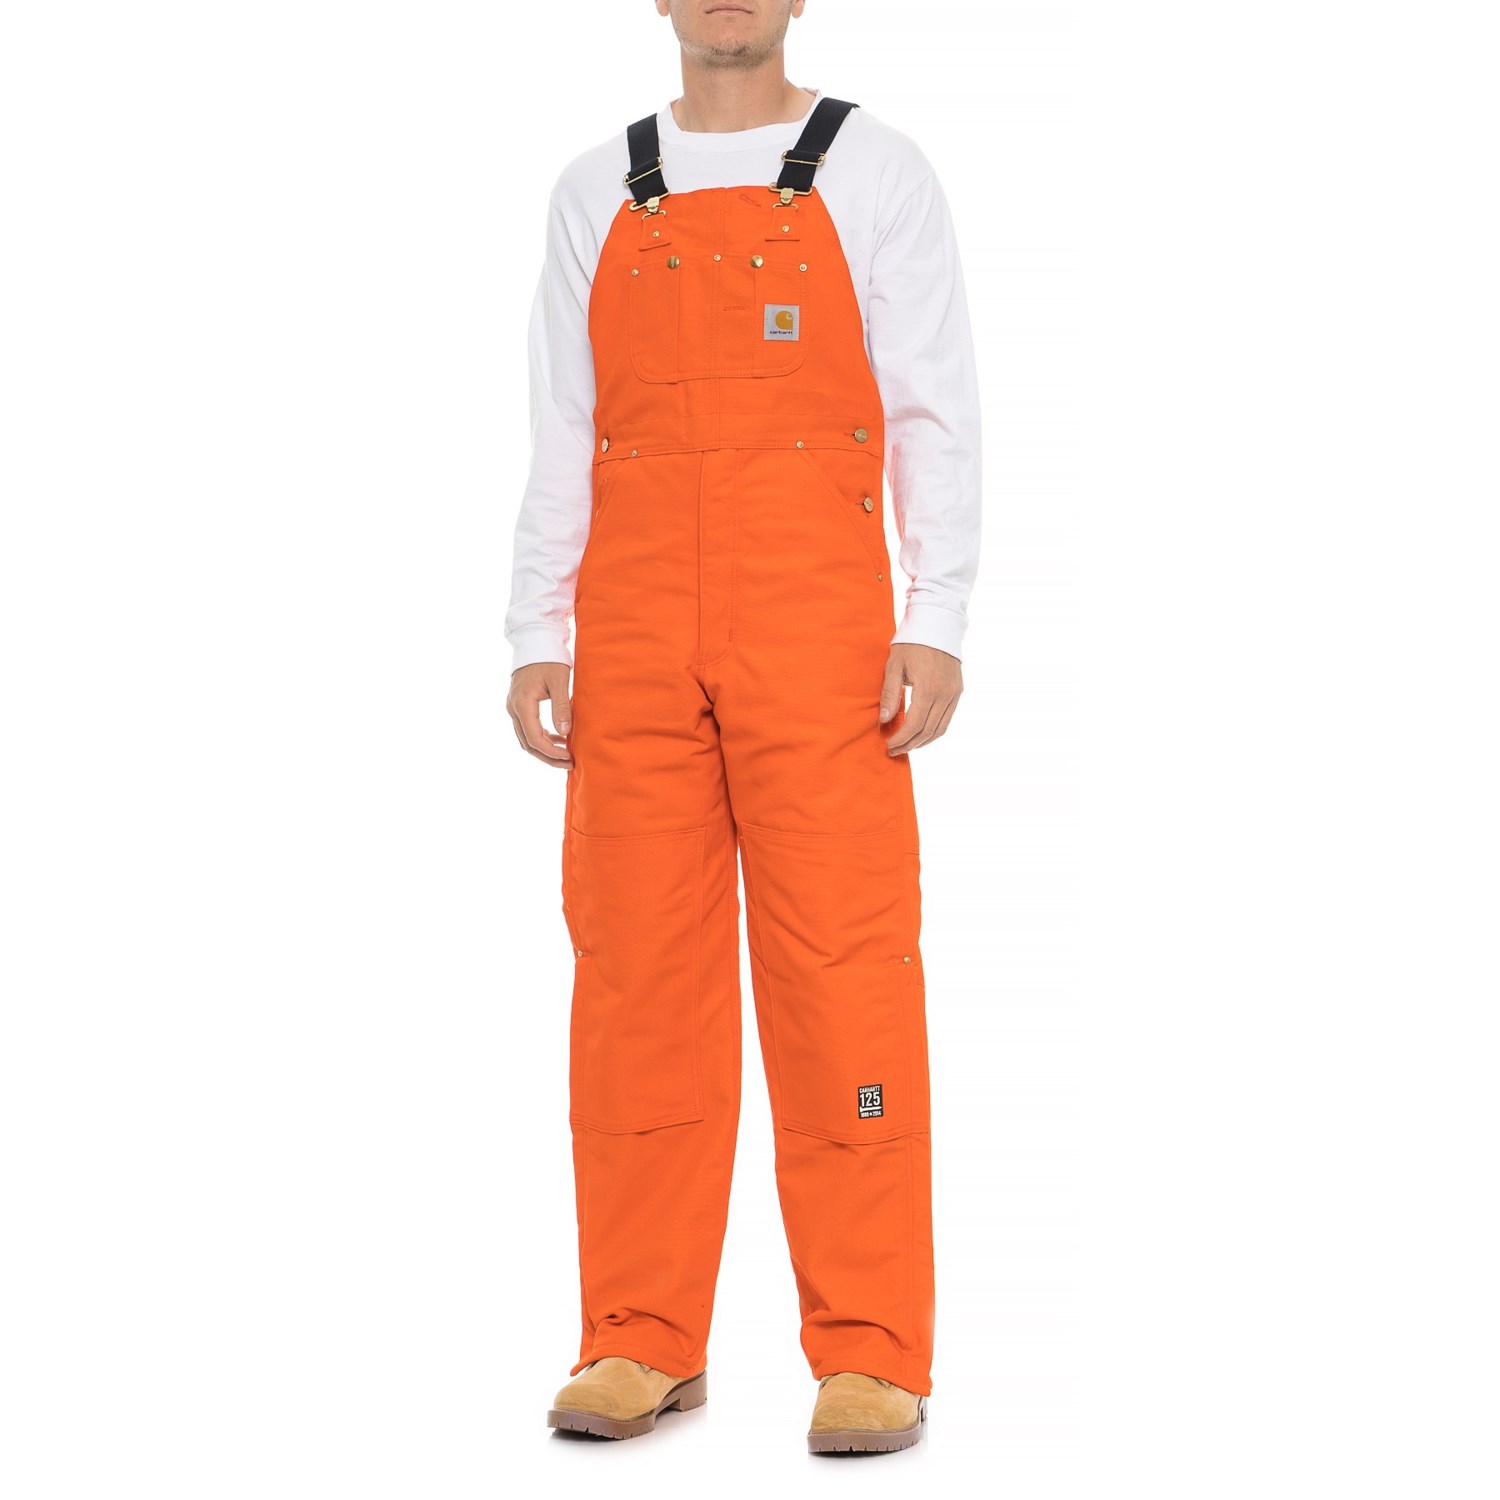 Carhartt Insulated Coveralls Sizing Chart